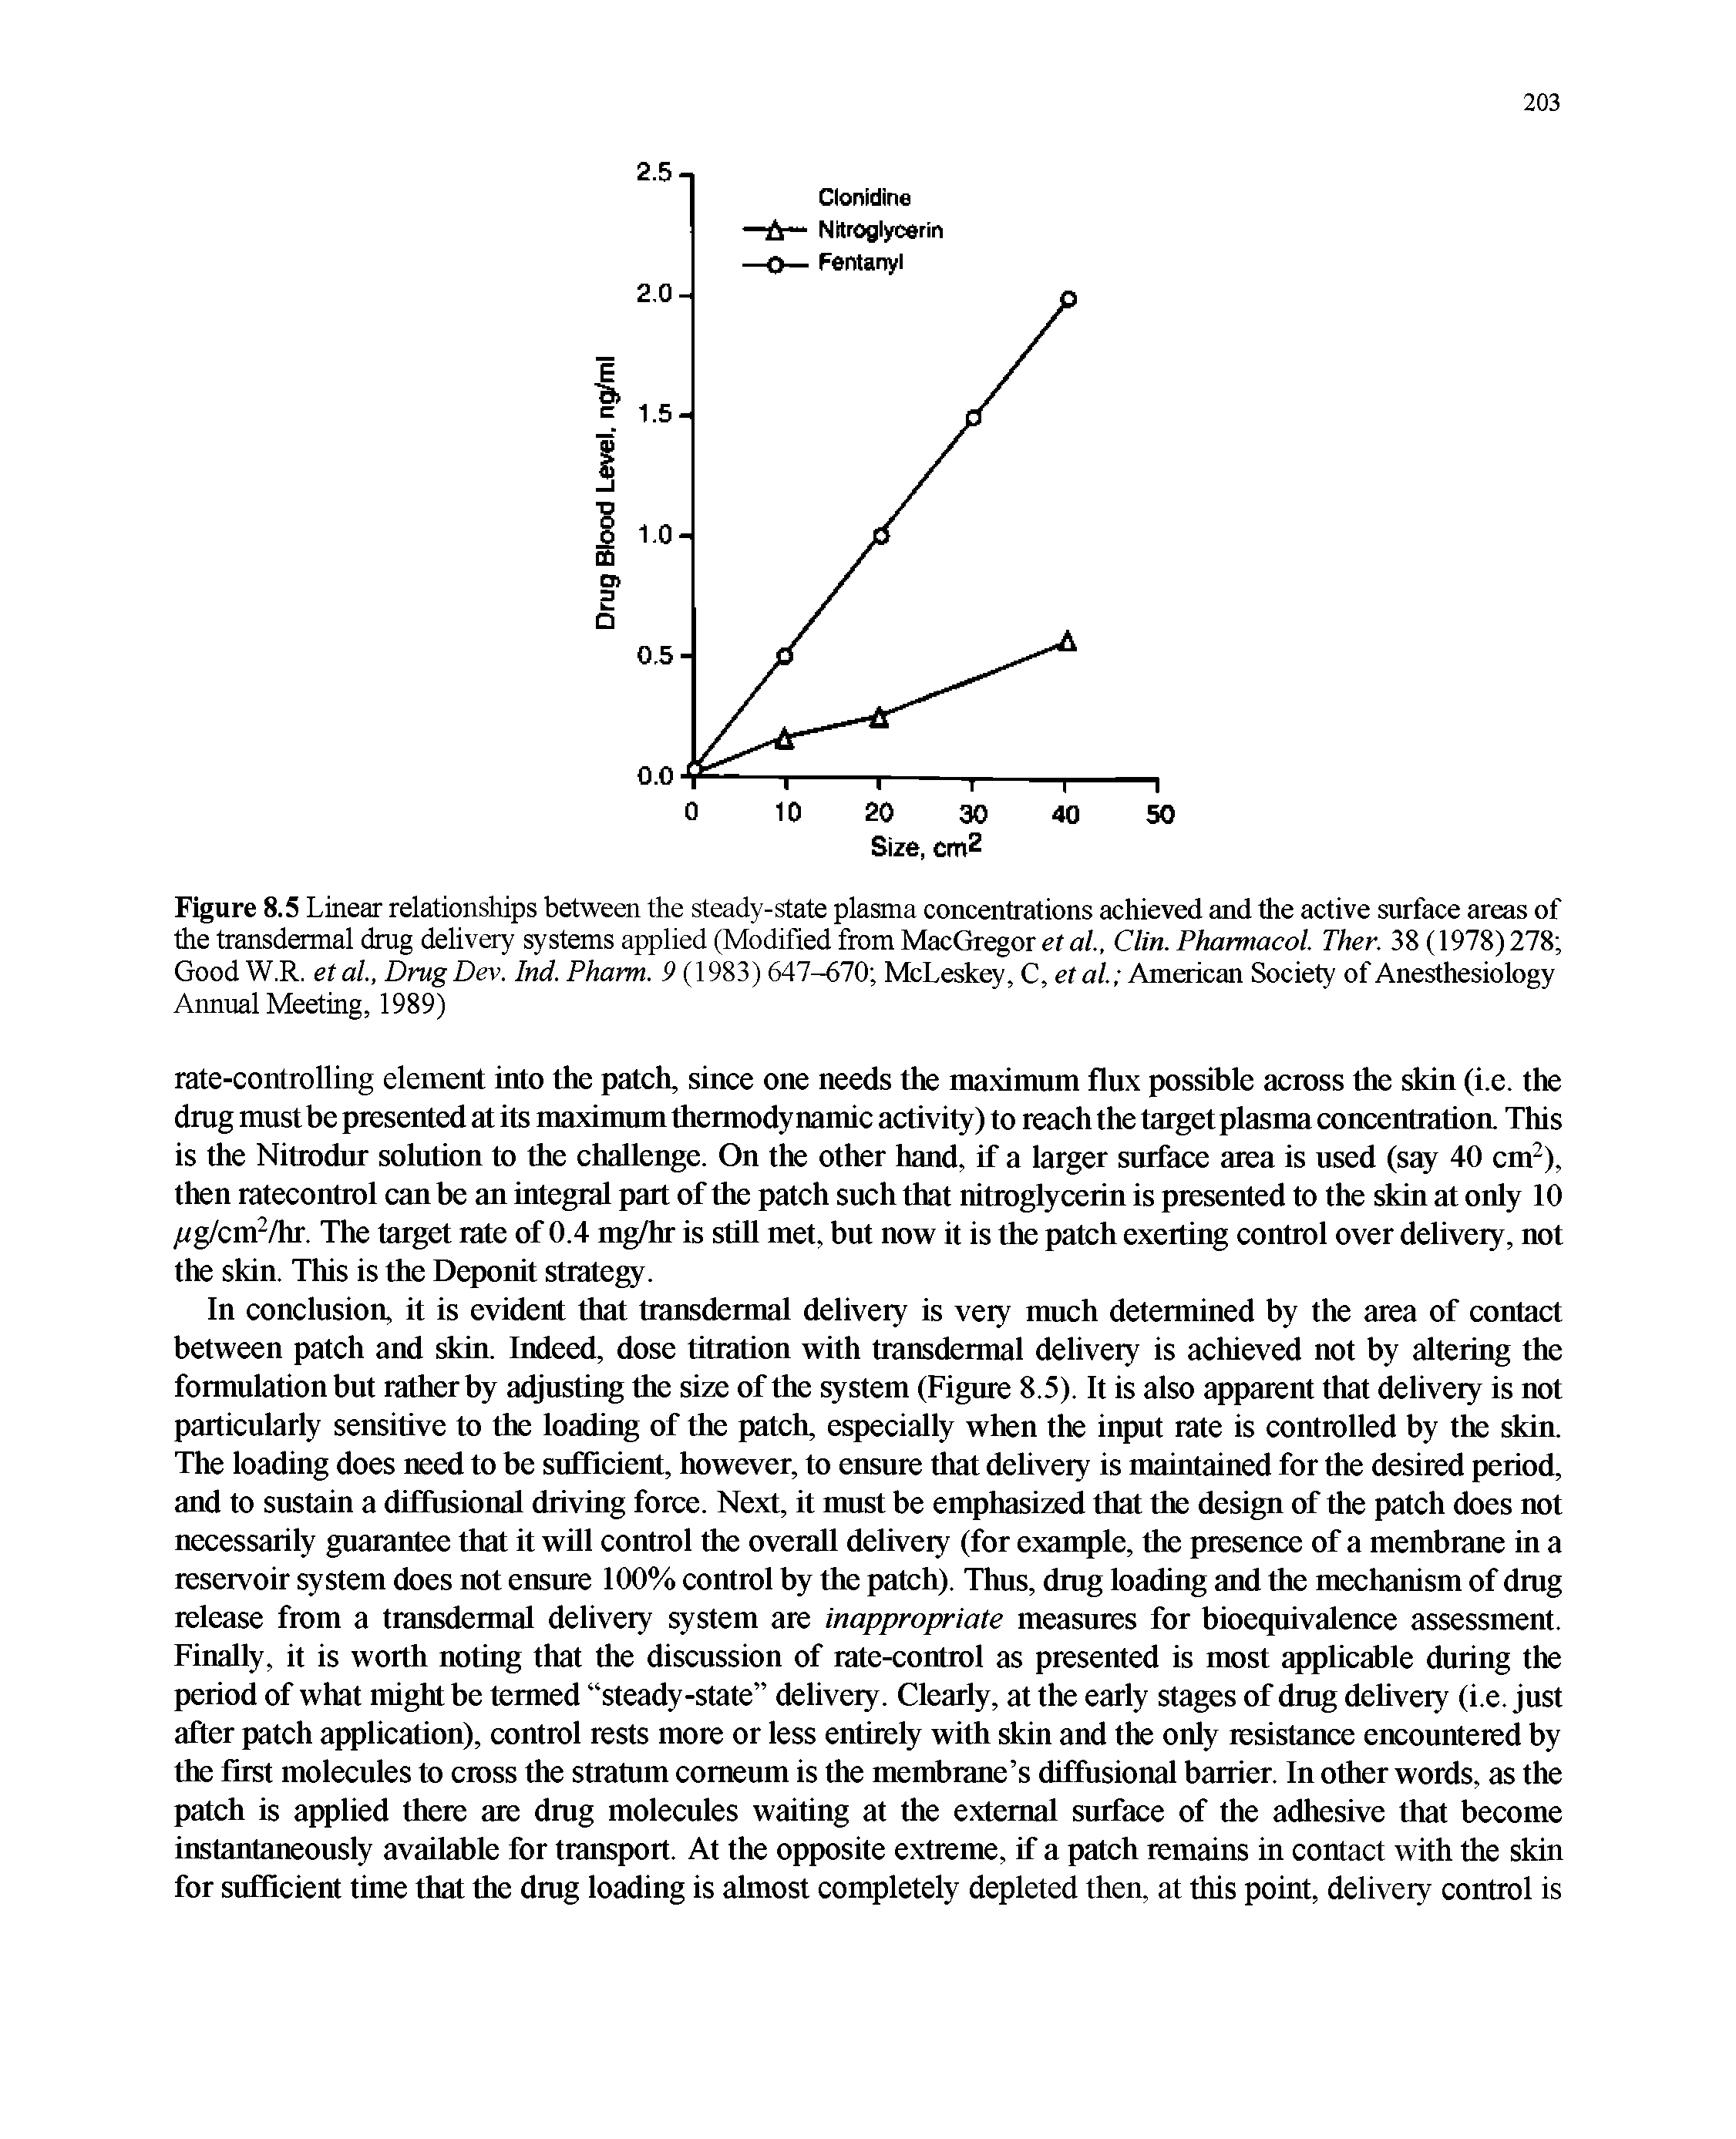 Figure 8.5 Linear relationships between the steady-state plasma concentrations achieved and the active surface areas of the transdermal drug delivery systems applied (Modified from MacGregor et al Clin. Pharmacol. Ther. 38(1978) 278 Good W.R. etal., Drug Dev. Ind. Pharm. 9 (1983) 647-670 McLeskey, C, etal. American Society of Anesthesiology Annual Meeting, 1989)...